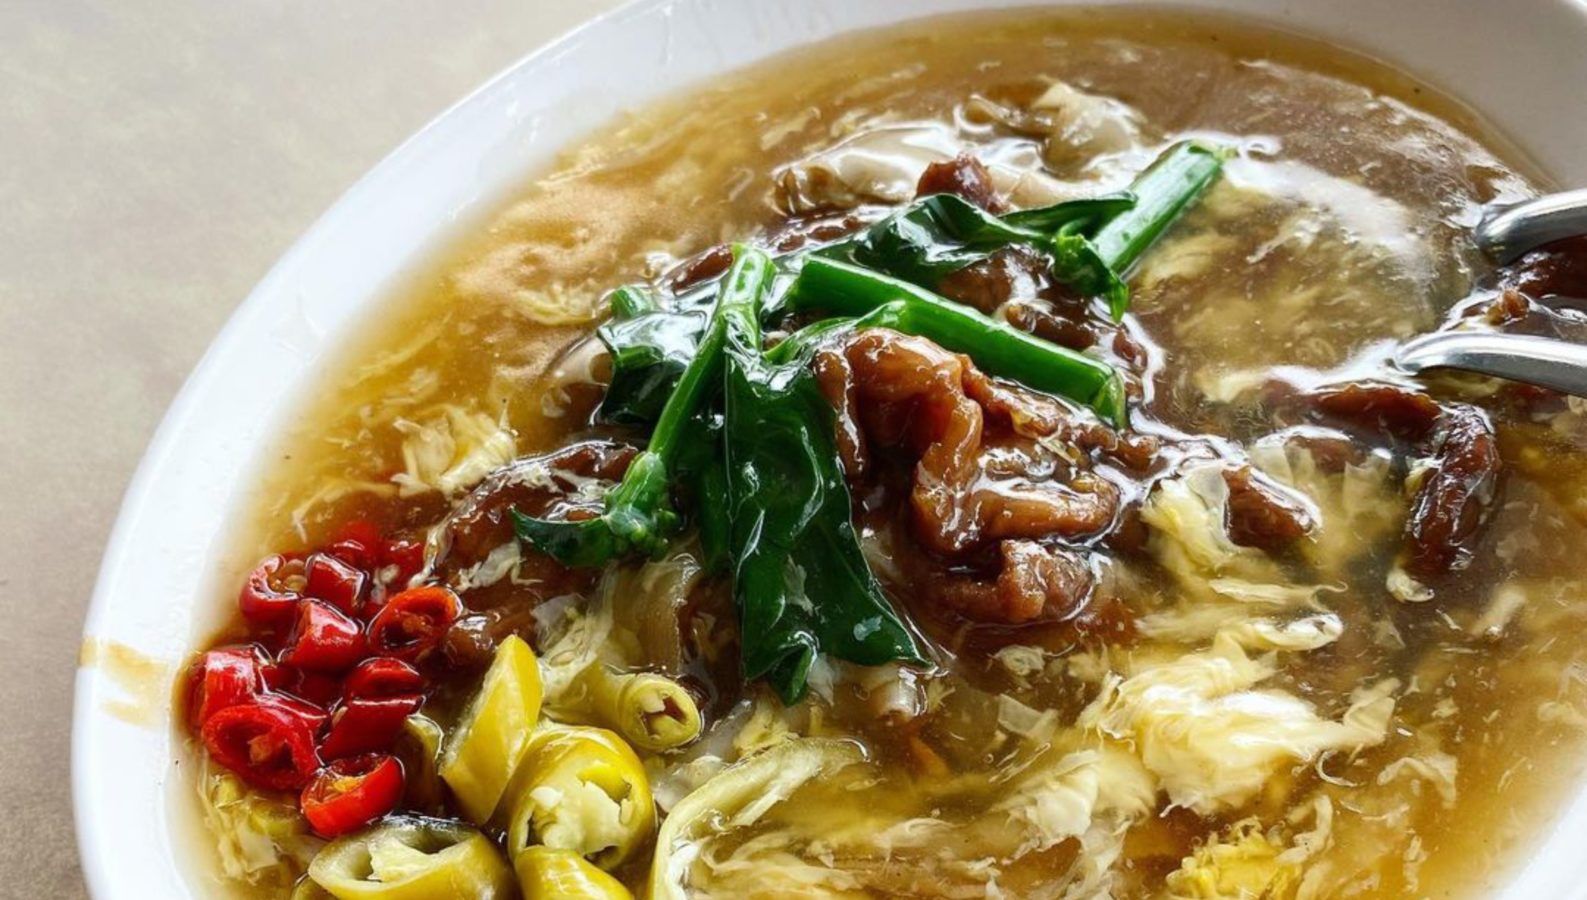 Where to find the best hor fun in Singapore with plenty of wok-hei